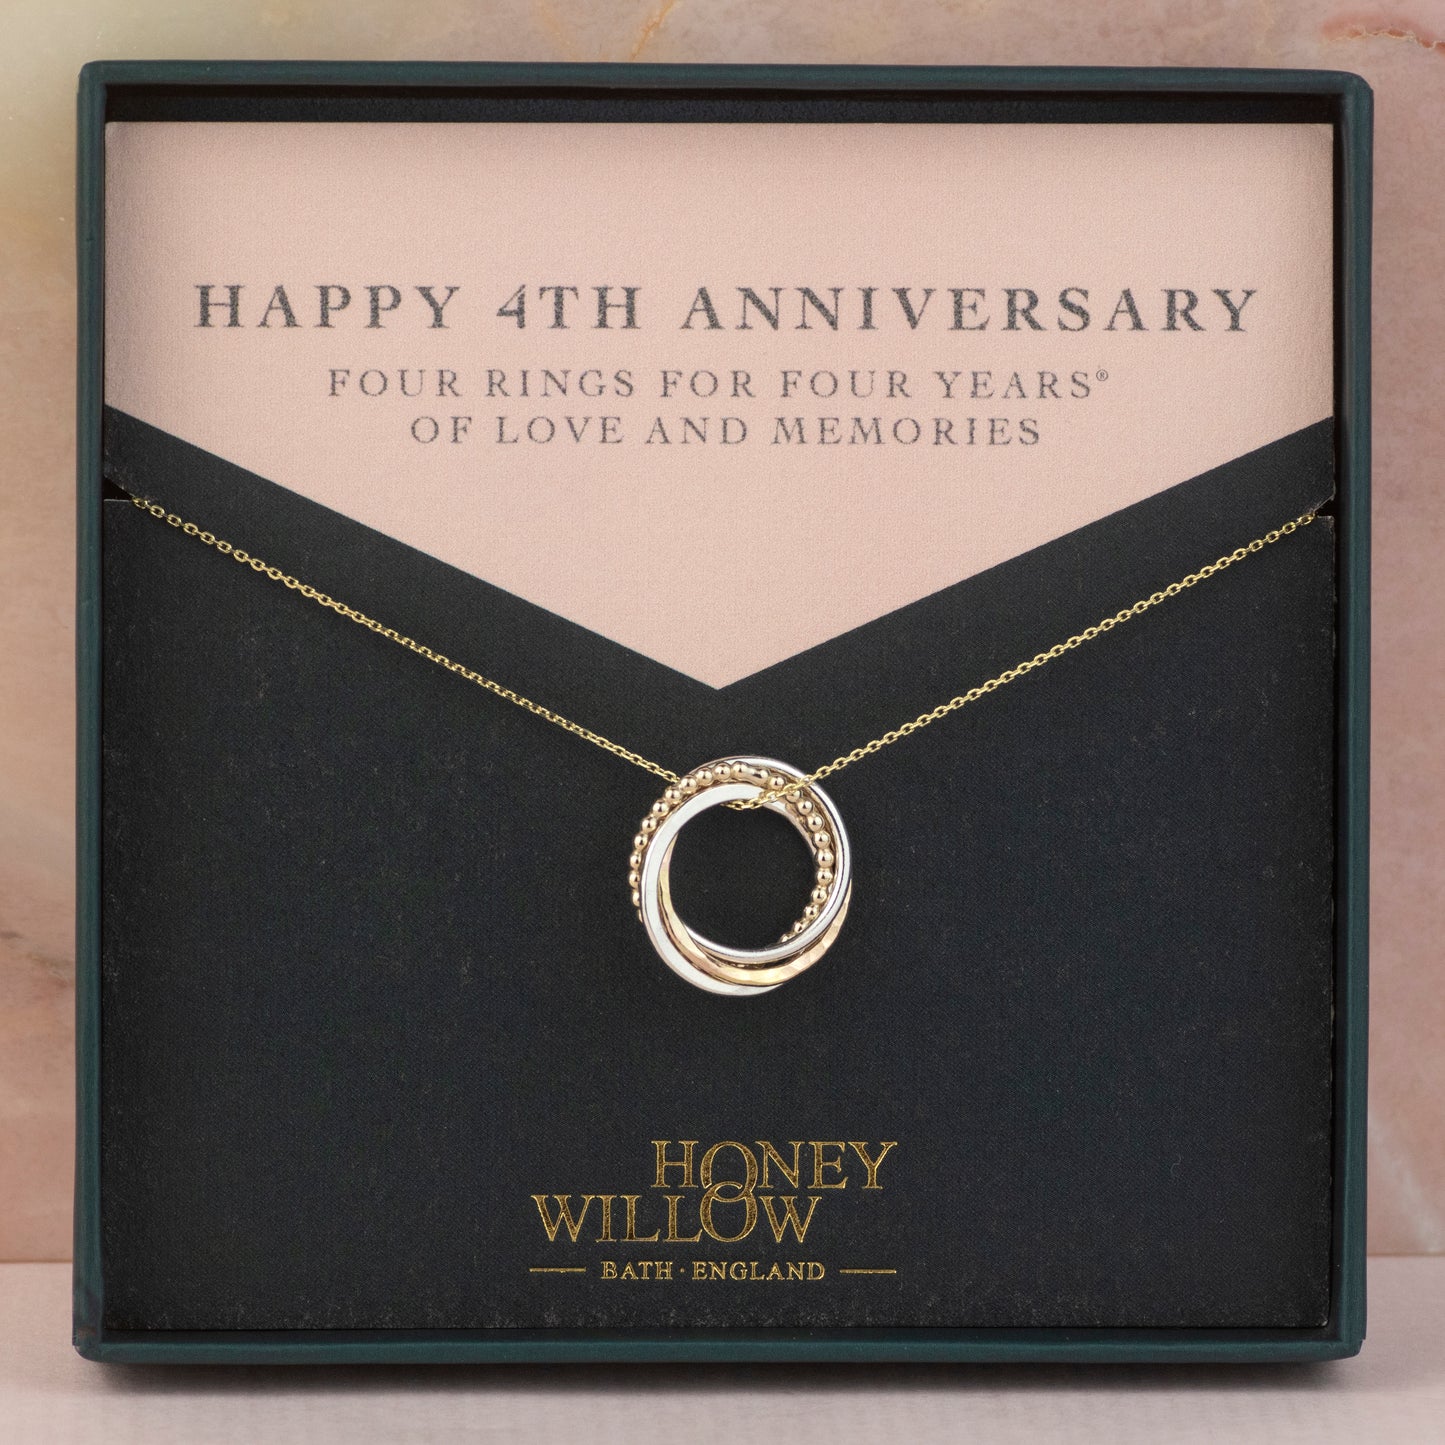 9kt Gold 4th Anniversary Necklace - 4 Rings for 4 Years